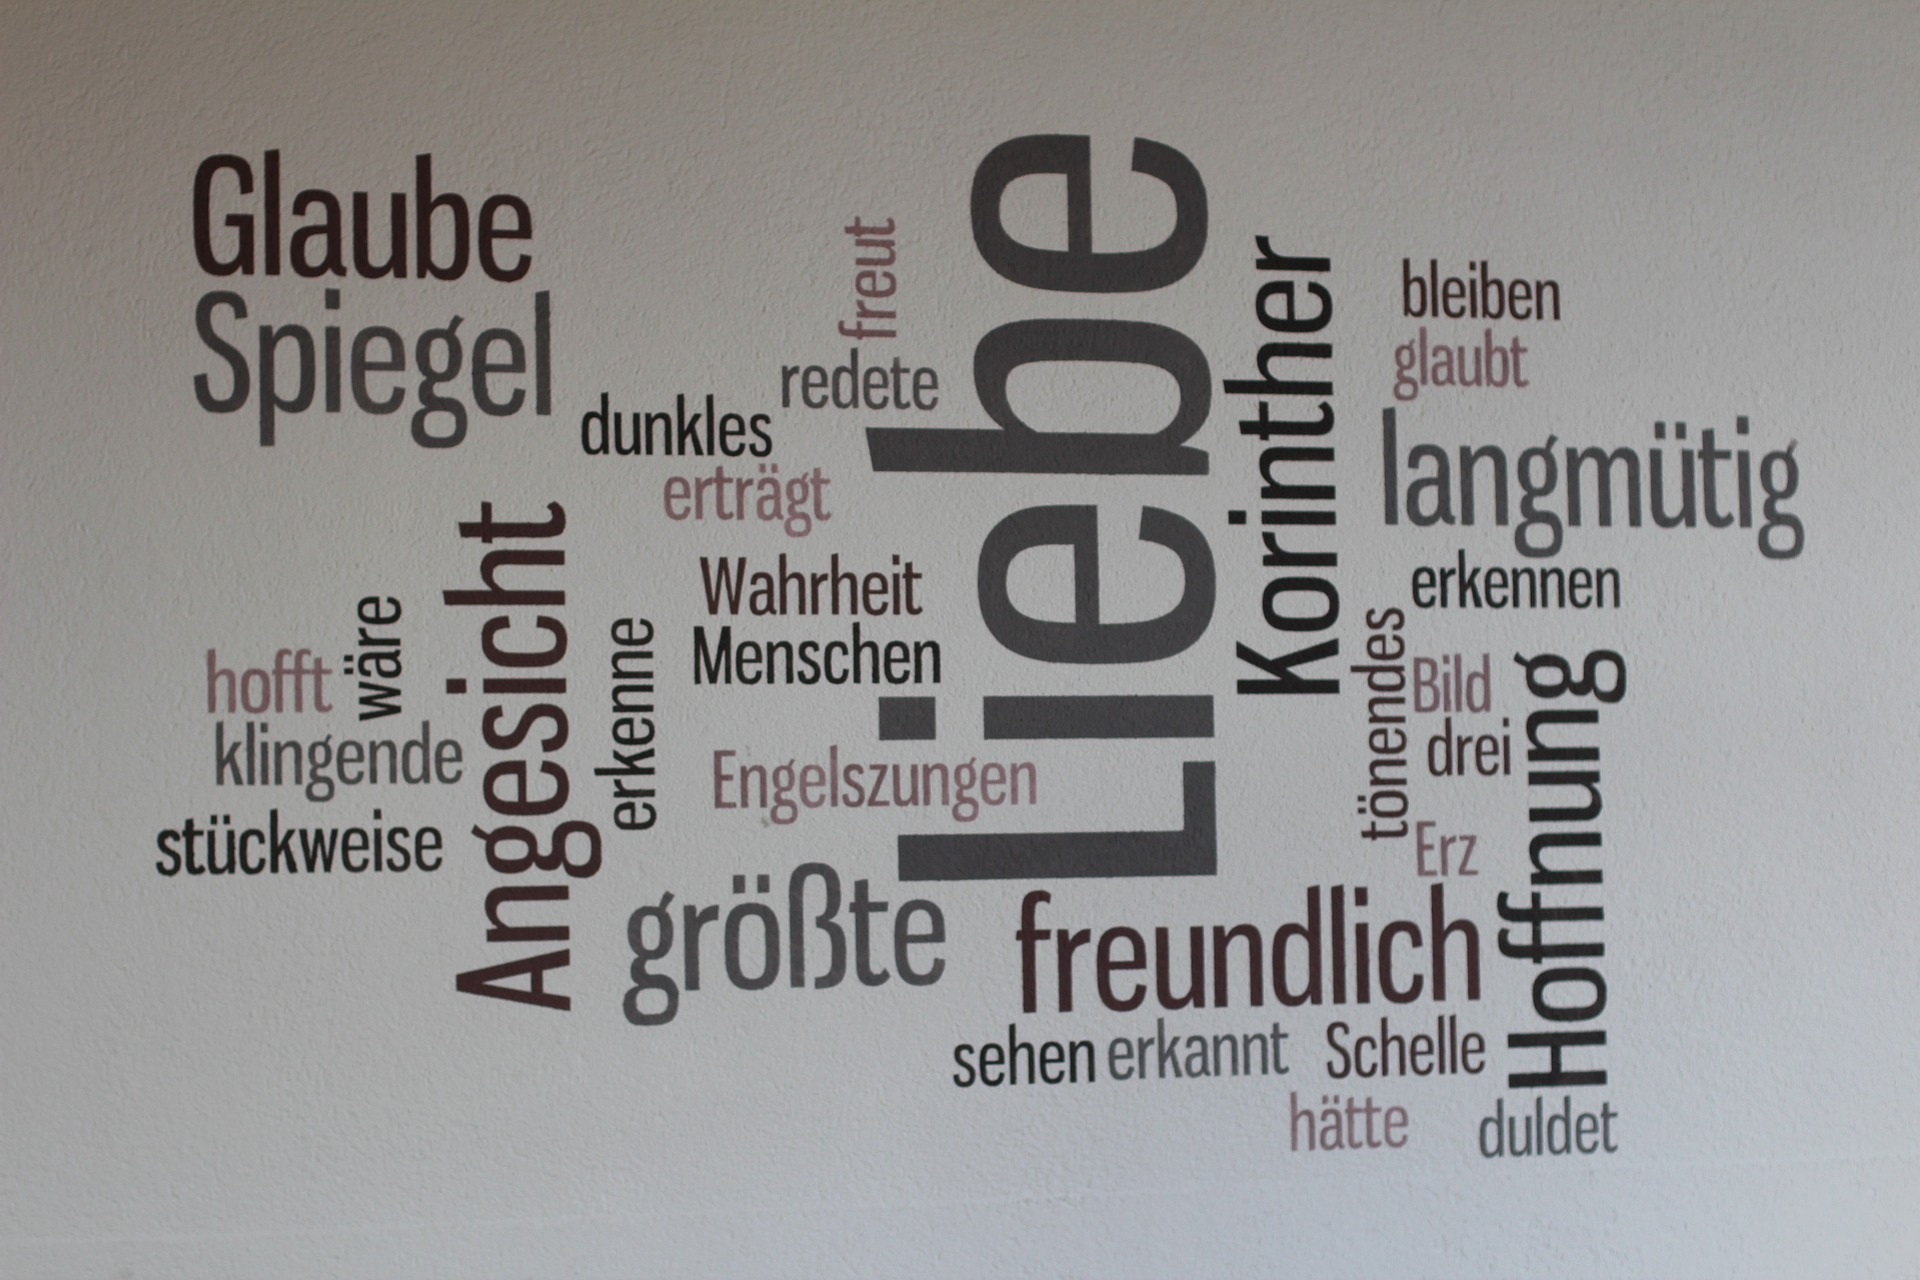 Vinyl wall stickers translating "love", "believe", "faith" in multiple languages